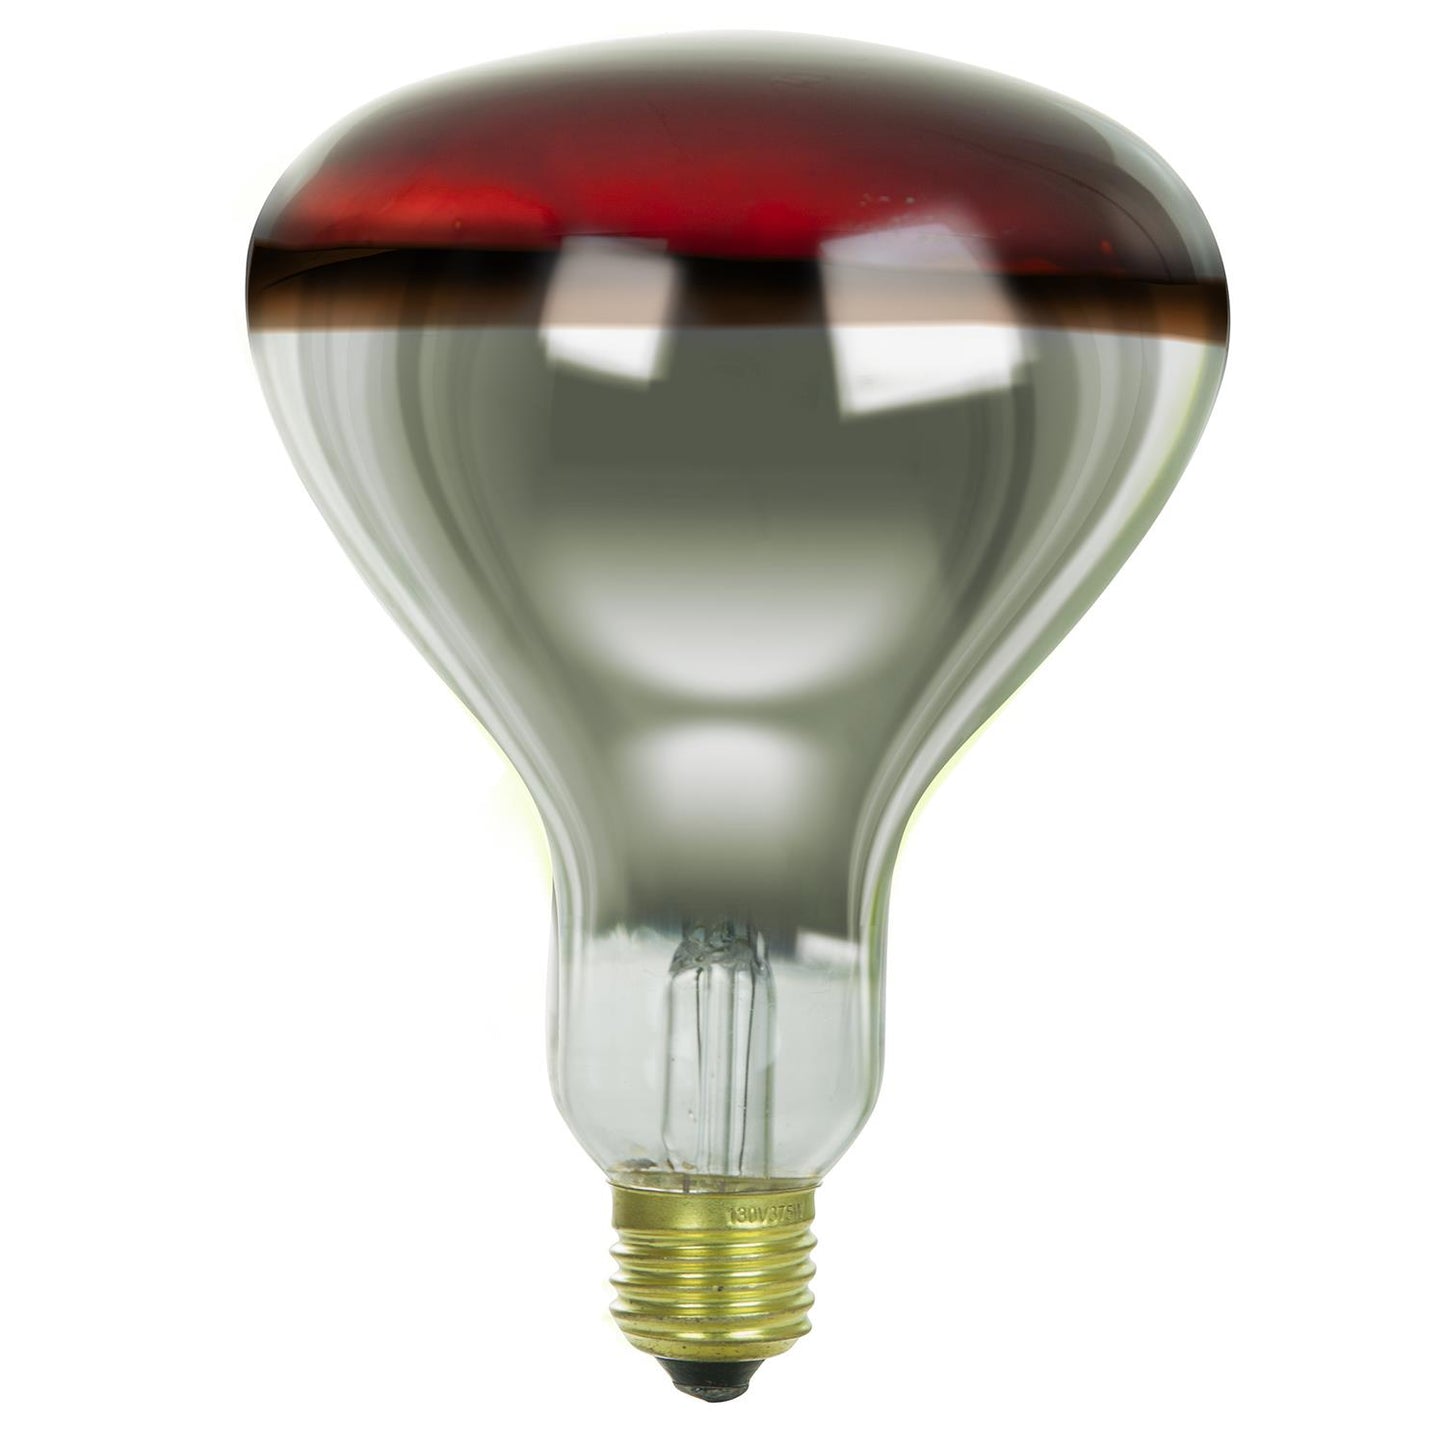 Sunlite 250 Watt R40 Incandescent Heat Lamp Bulb, Medium Base, Red, Dimmable, With Tuff Skin Shatter Resistant, Ideal for food preparation areas, saunas, infrared light therapy, salons, bathrooms, animal & reptile encosures, brooders and more